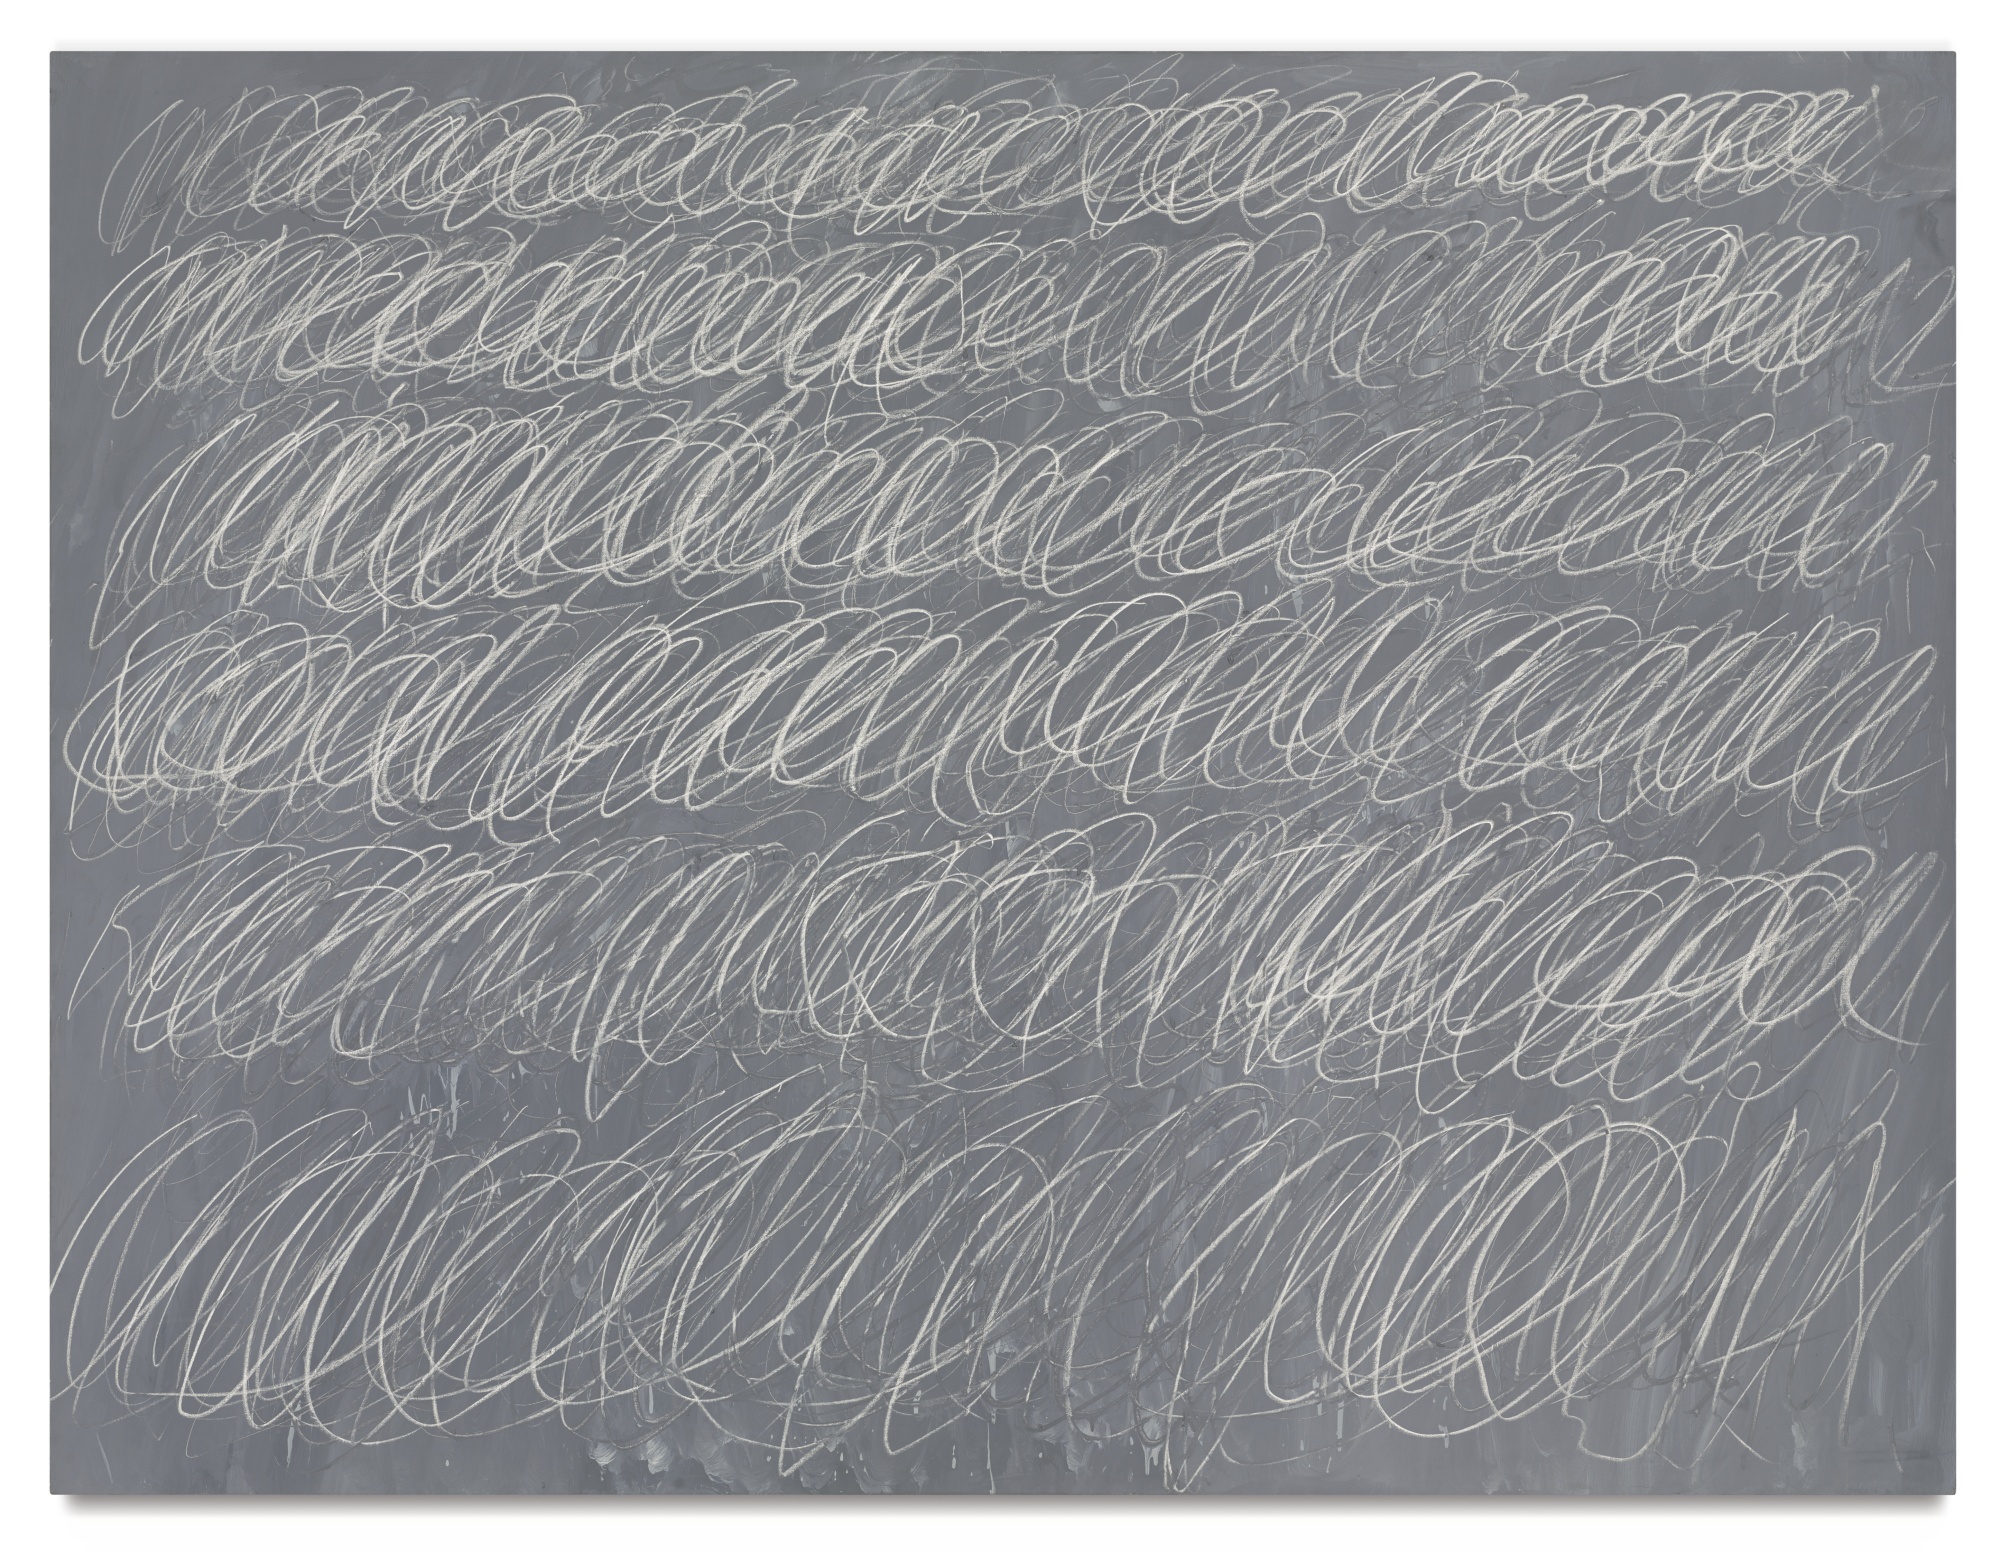 Nuovo record per Cy Twombly: 70,530,000$ da Sotheby’s. Totale asta 294,850,000$